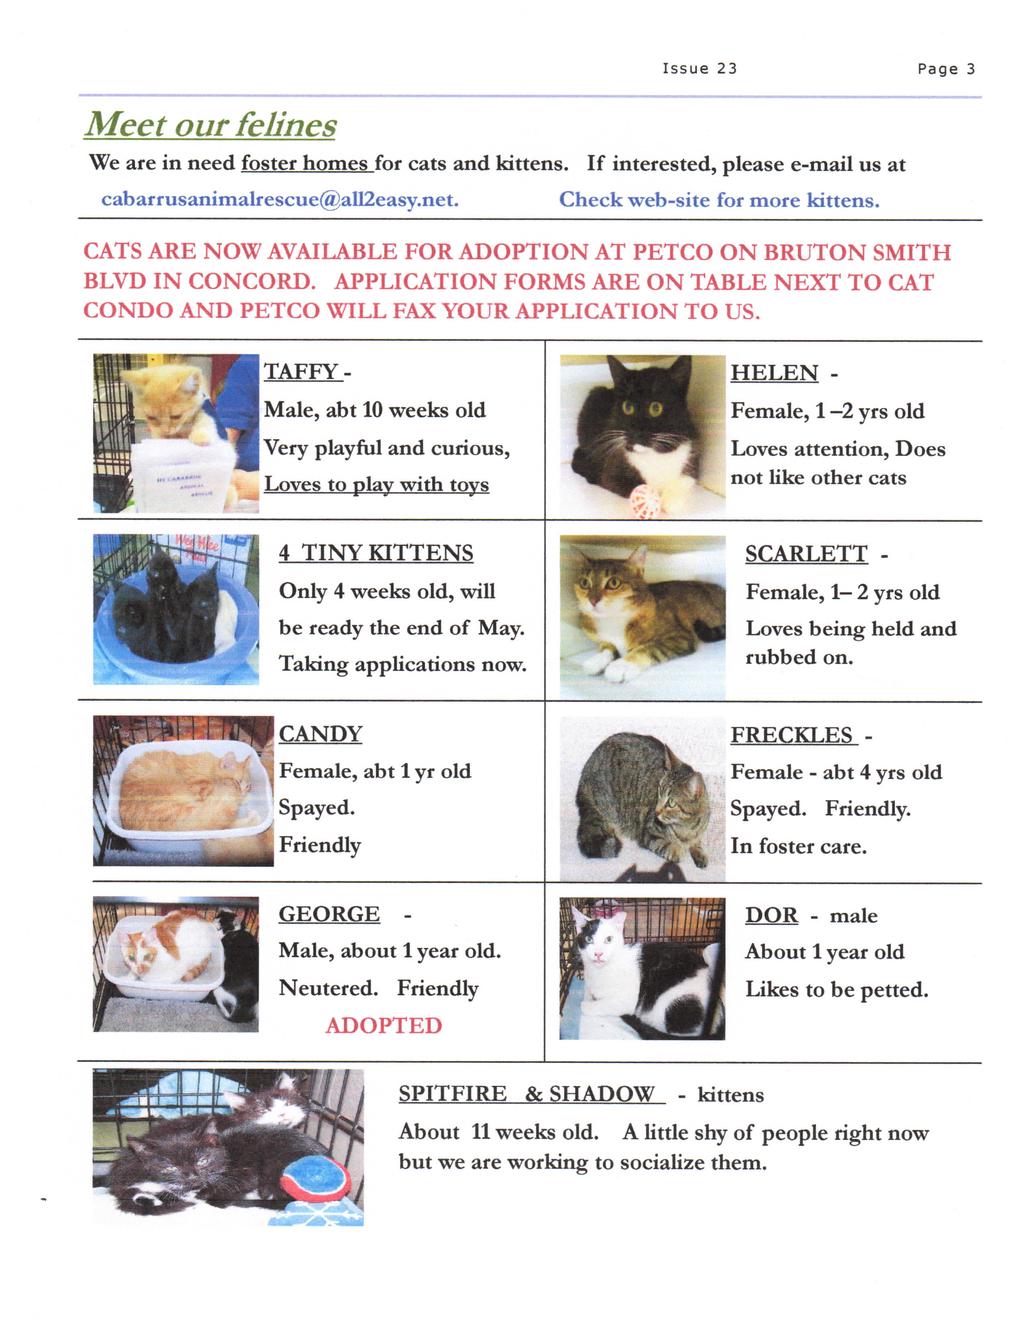 Meet our felines Issue 23 Page 3 We are in need foster homes for cats and kittens. If interested, please e-mail us at cabarrusanimalrescue@all2easy.net. Check web-site for more kittens.